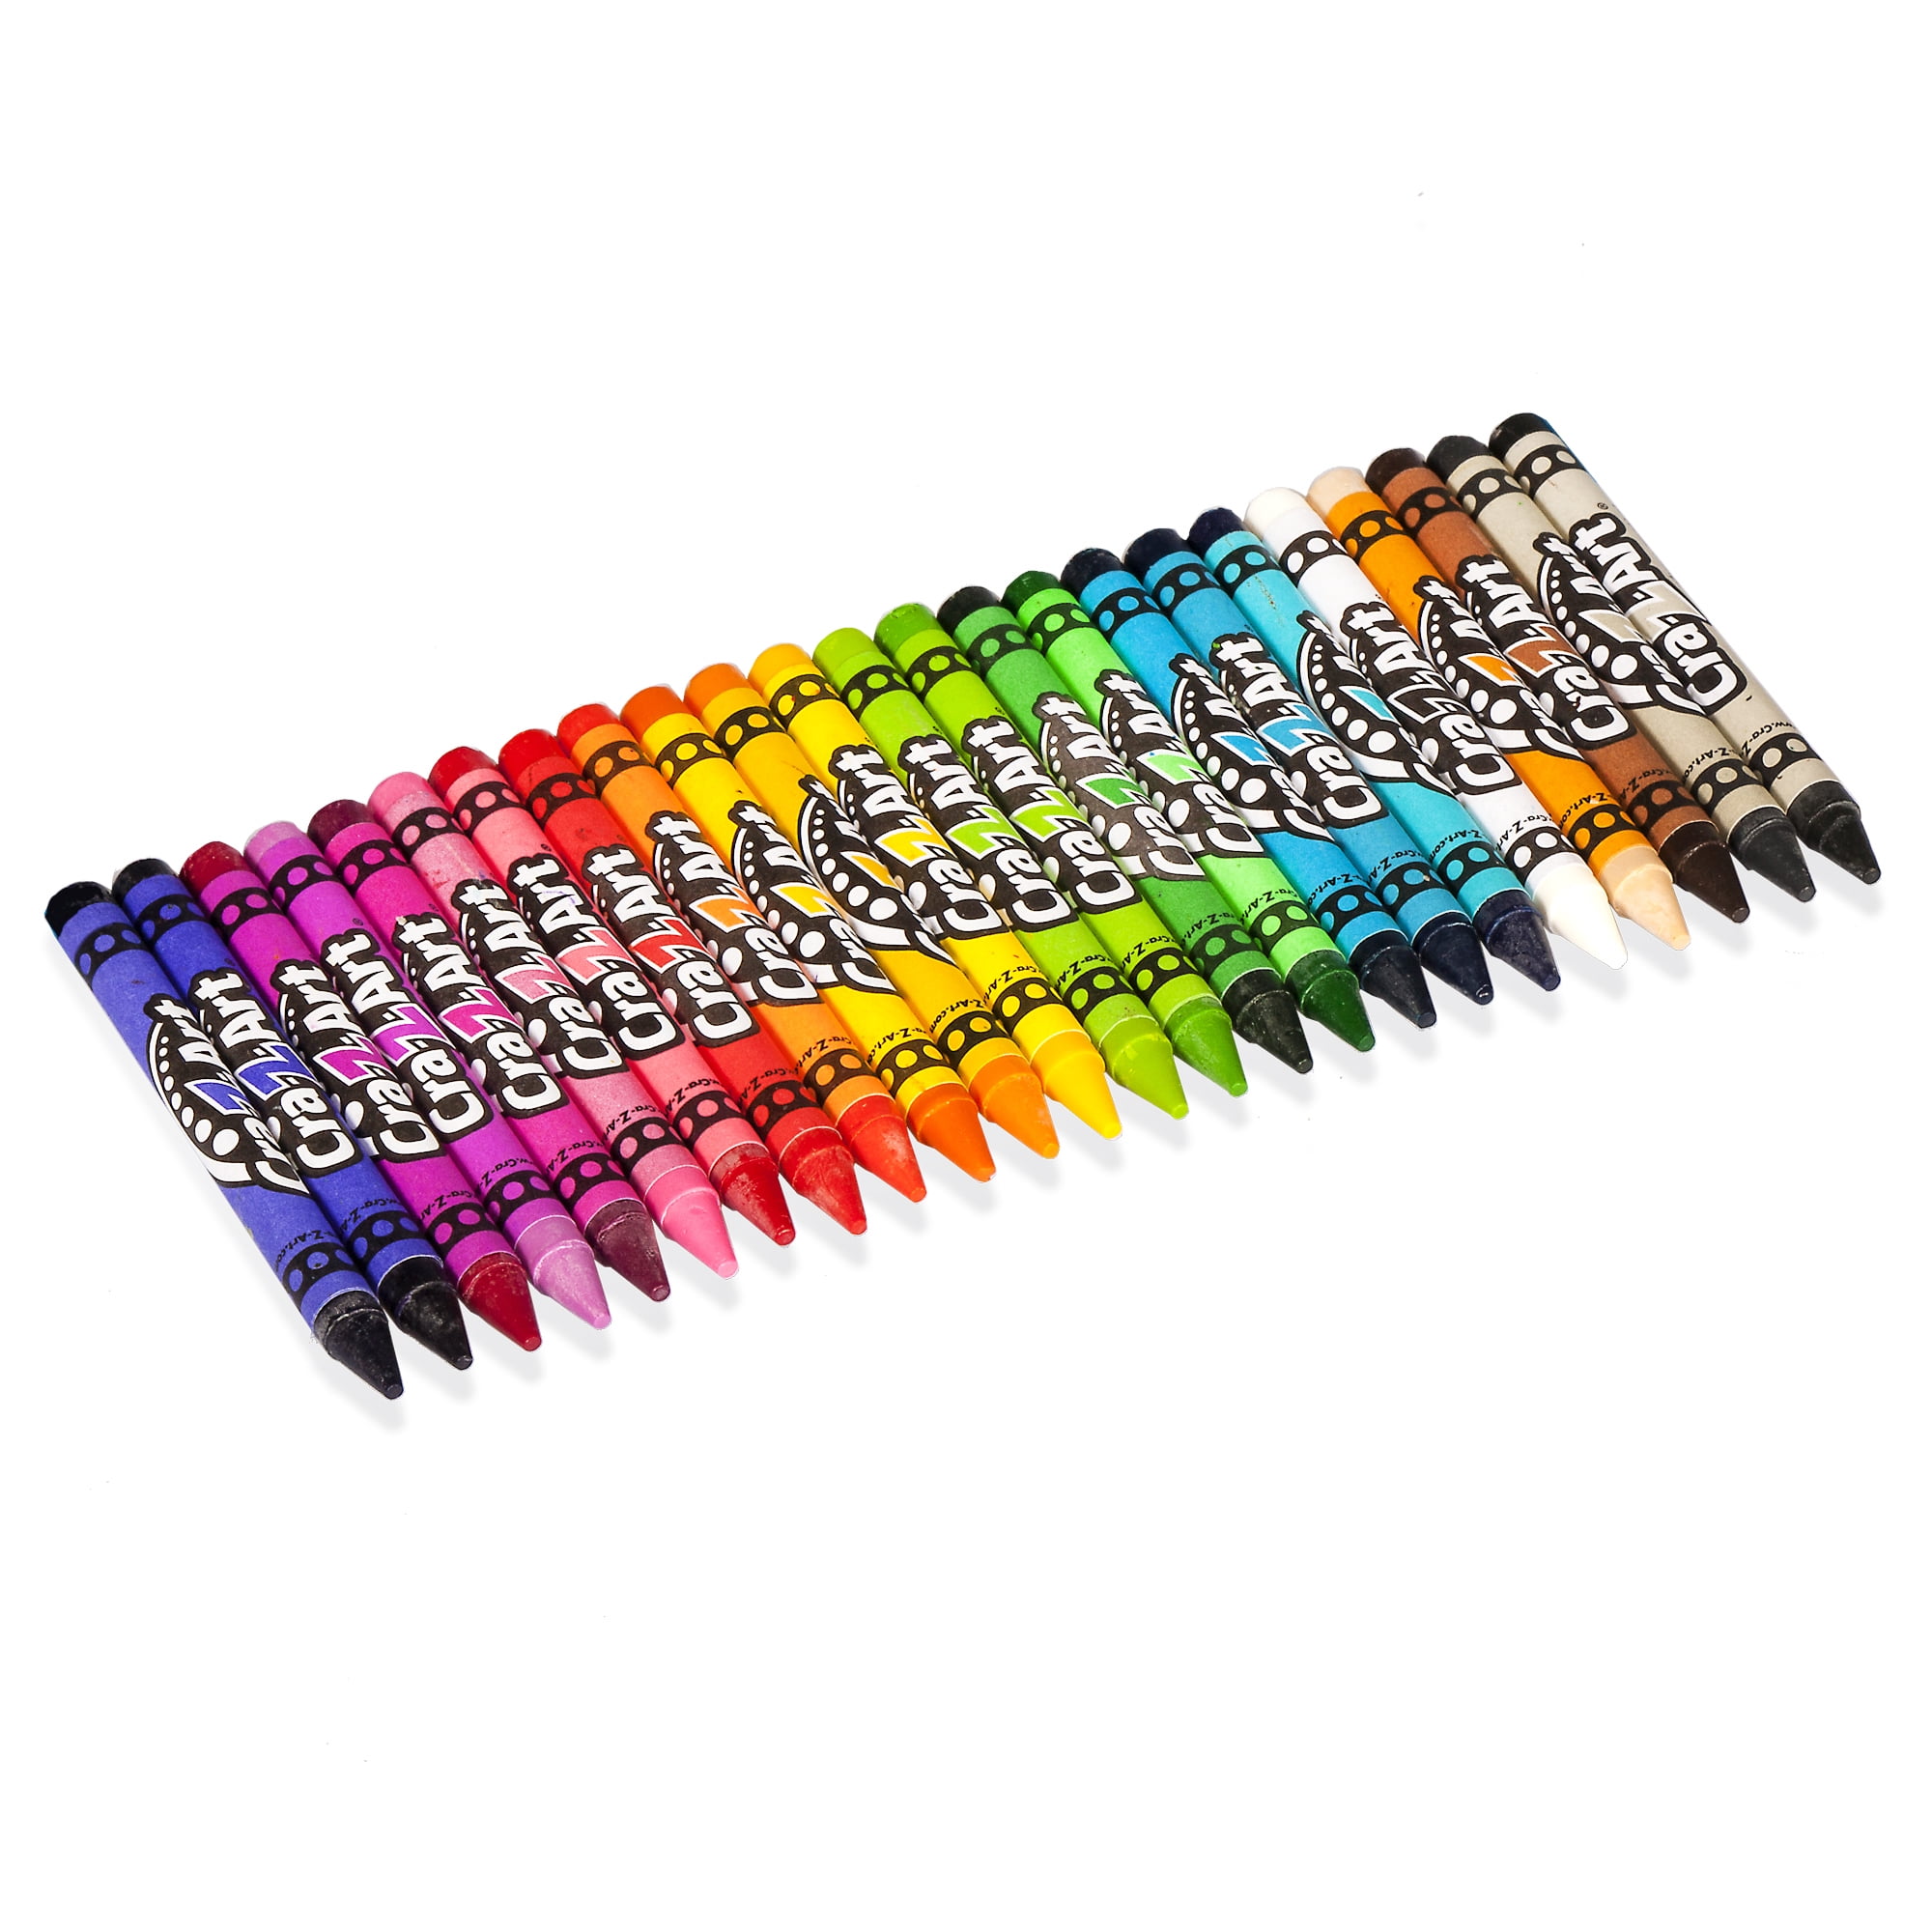 12 Packs: 24 Ct. (288 Total) Silky Crayons by Creatology, Size: 1.46 x 8.07 x 8.03